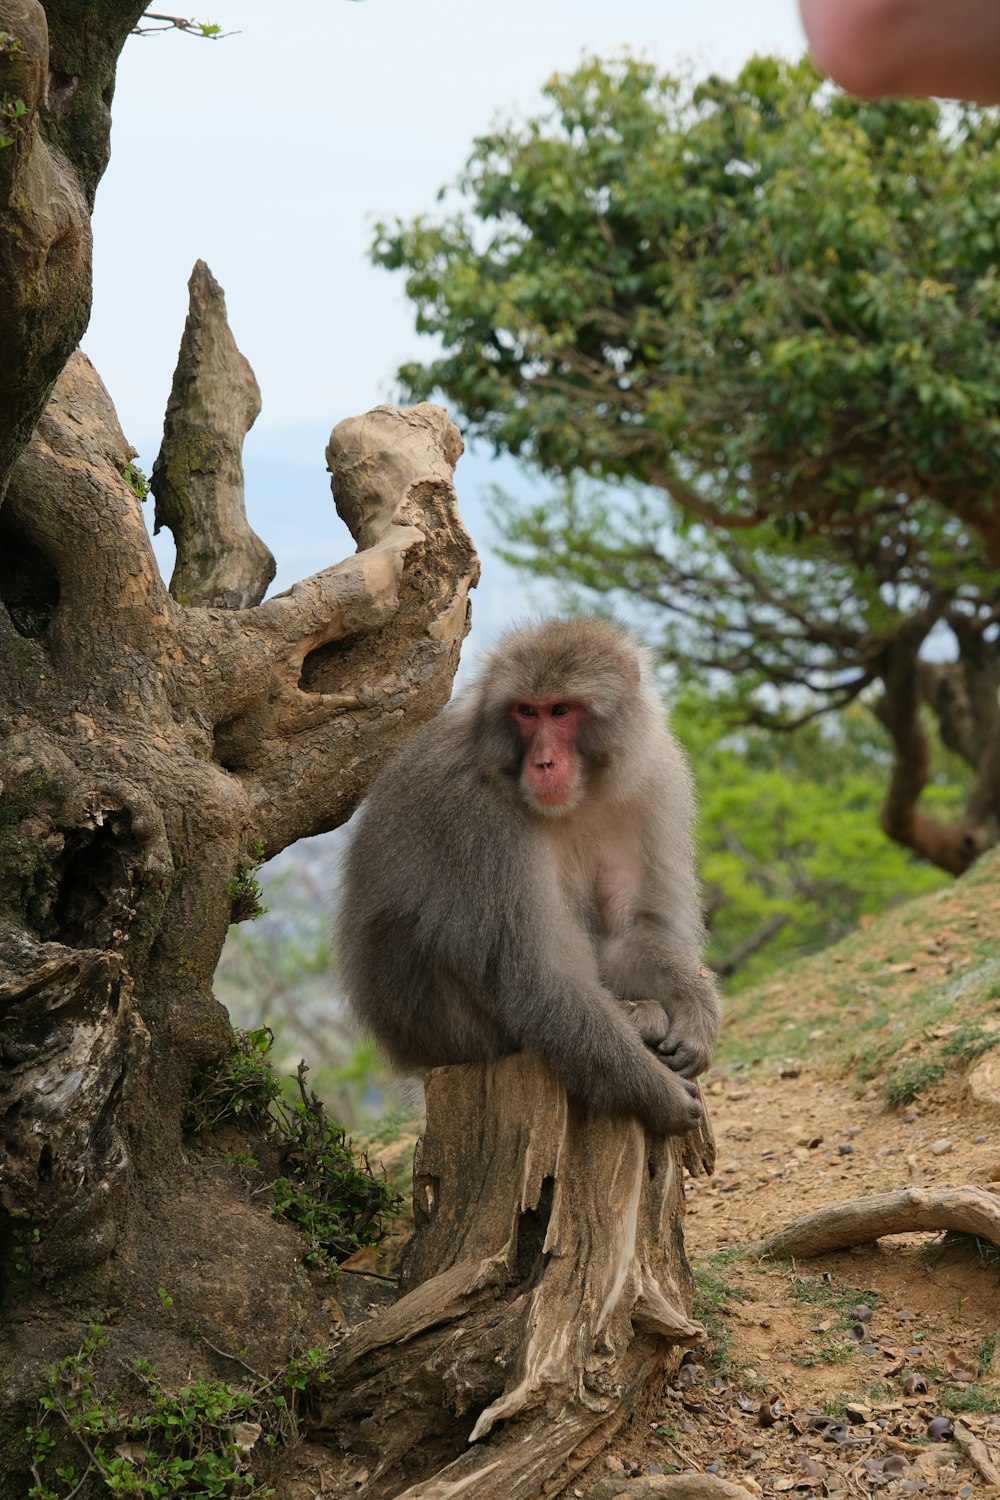 a monkey that is sitting on a tree stump